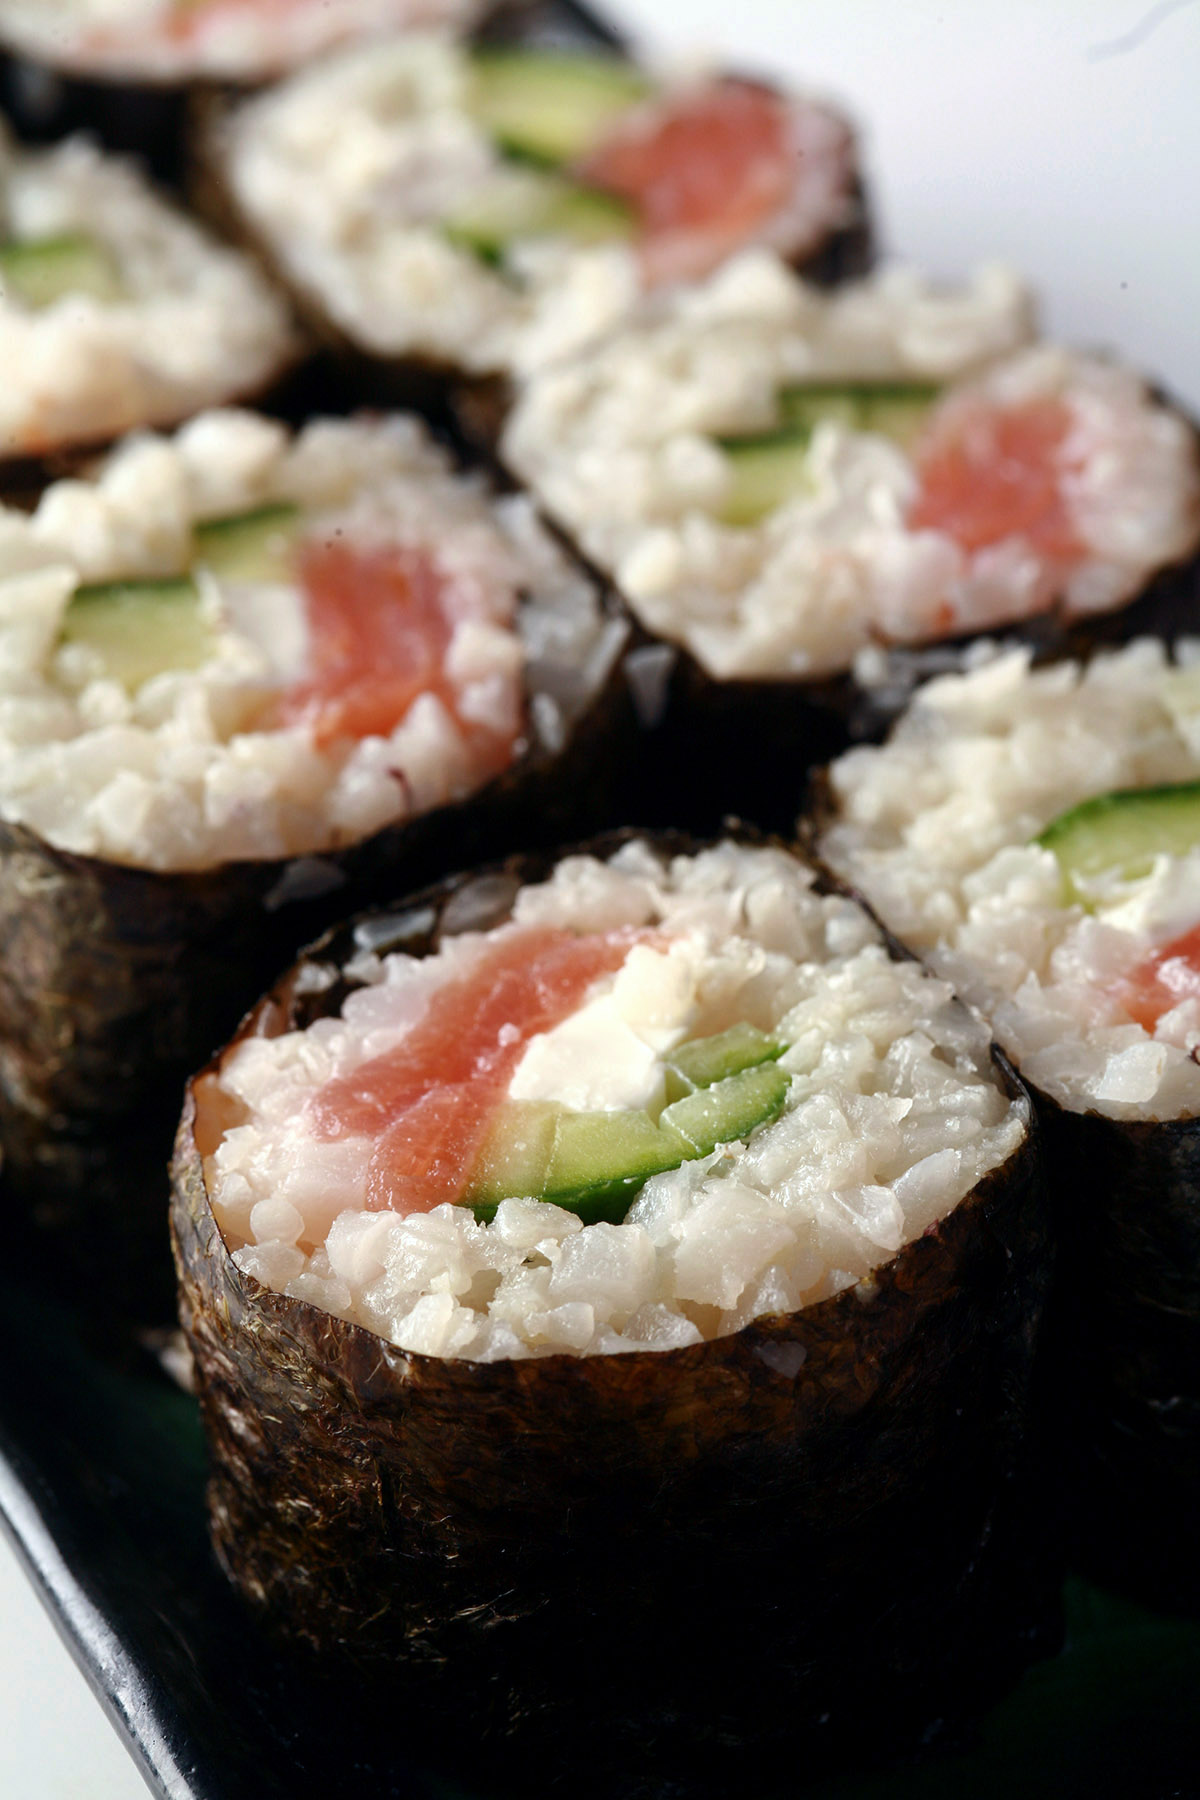 A close up view of a philly roll made from low carb sushi rice.